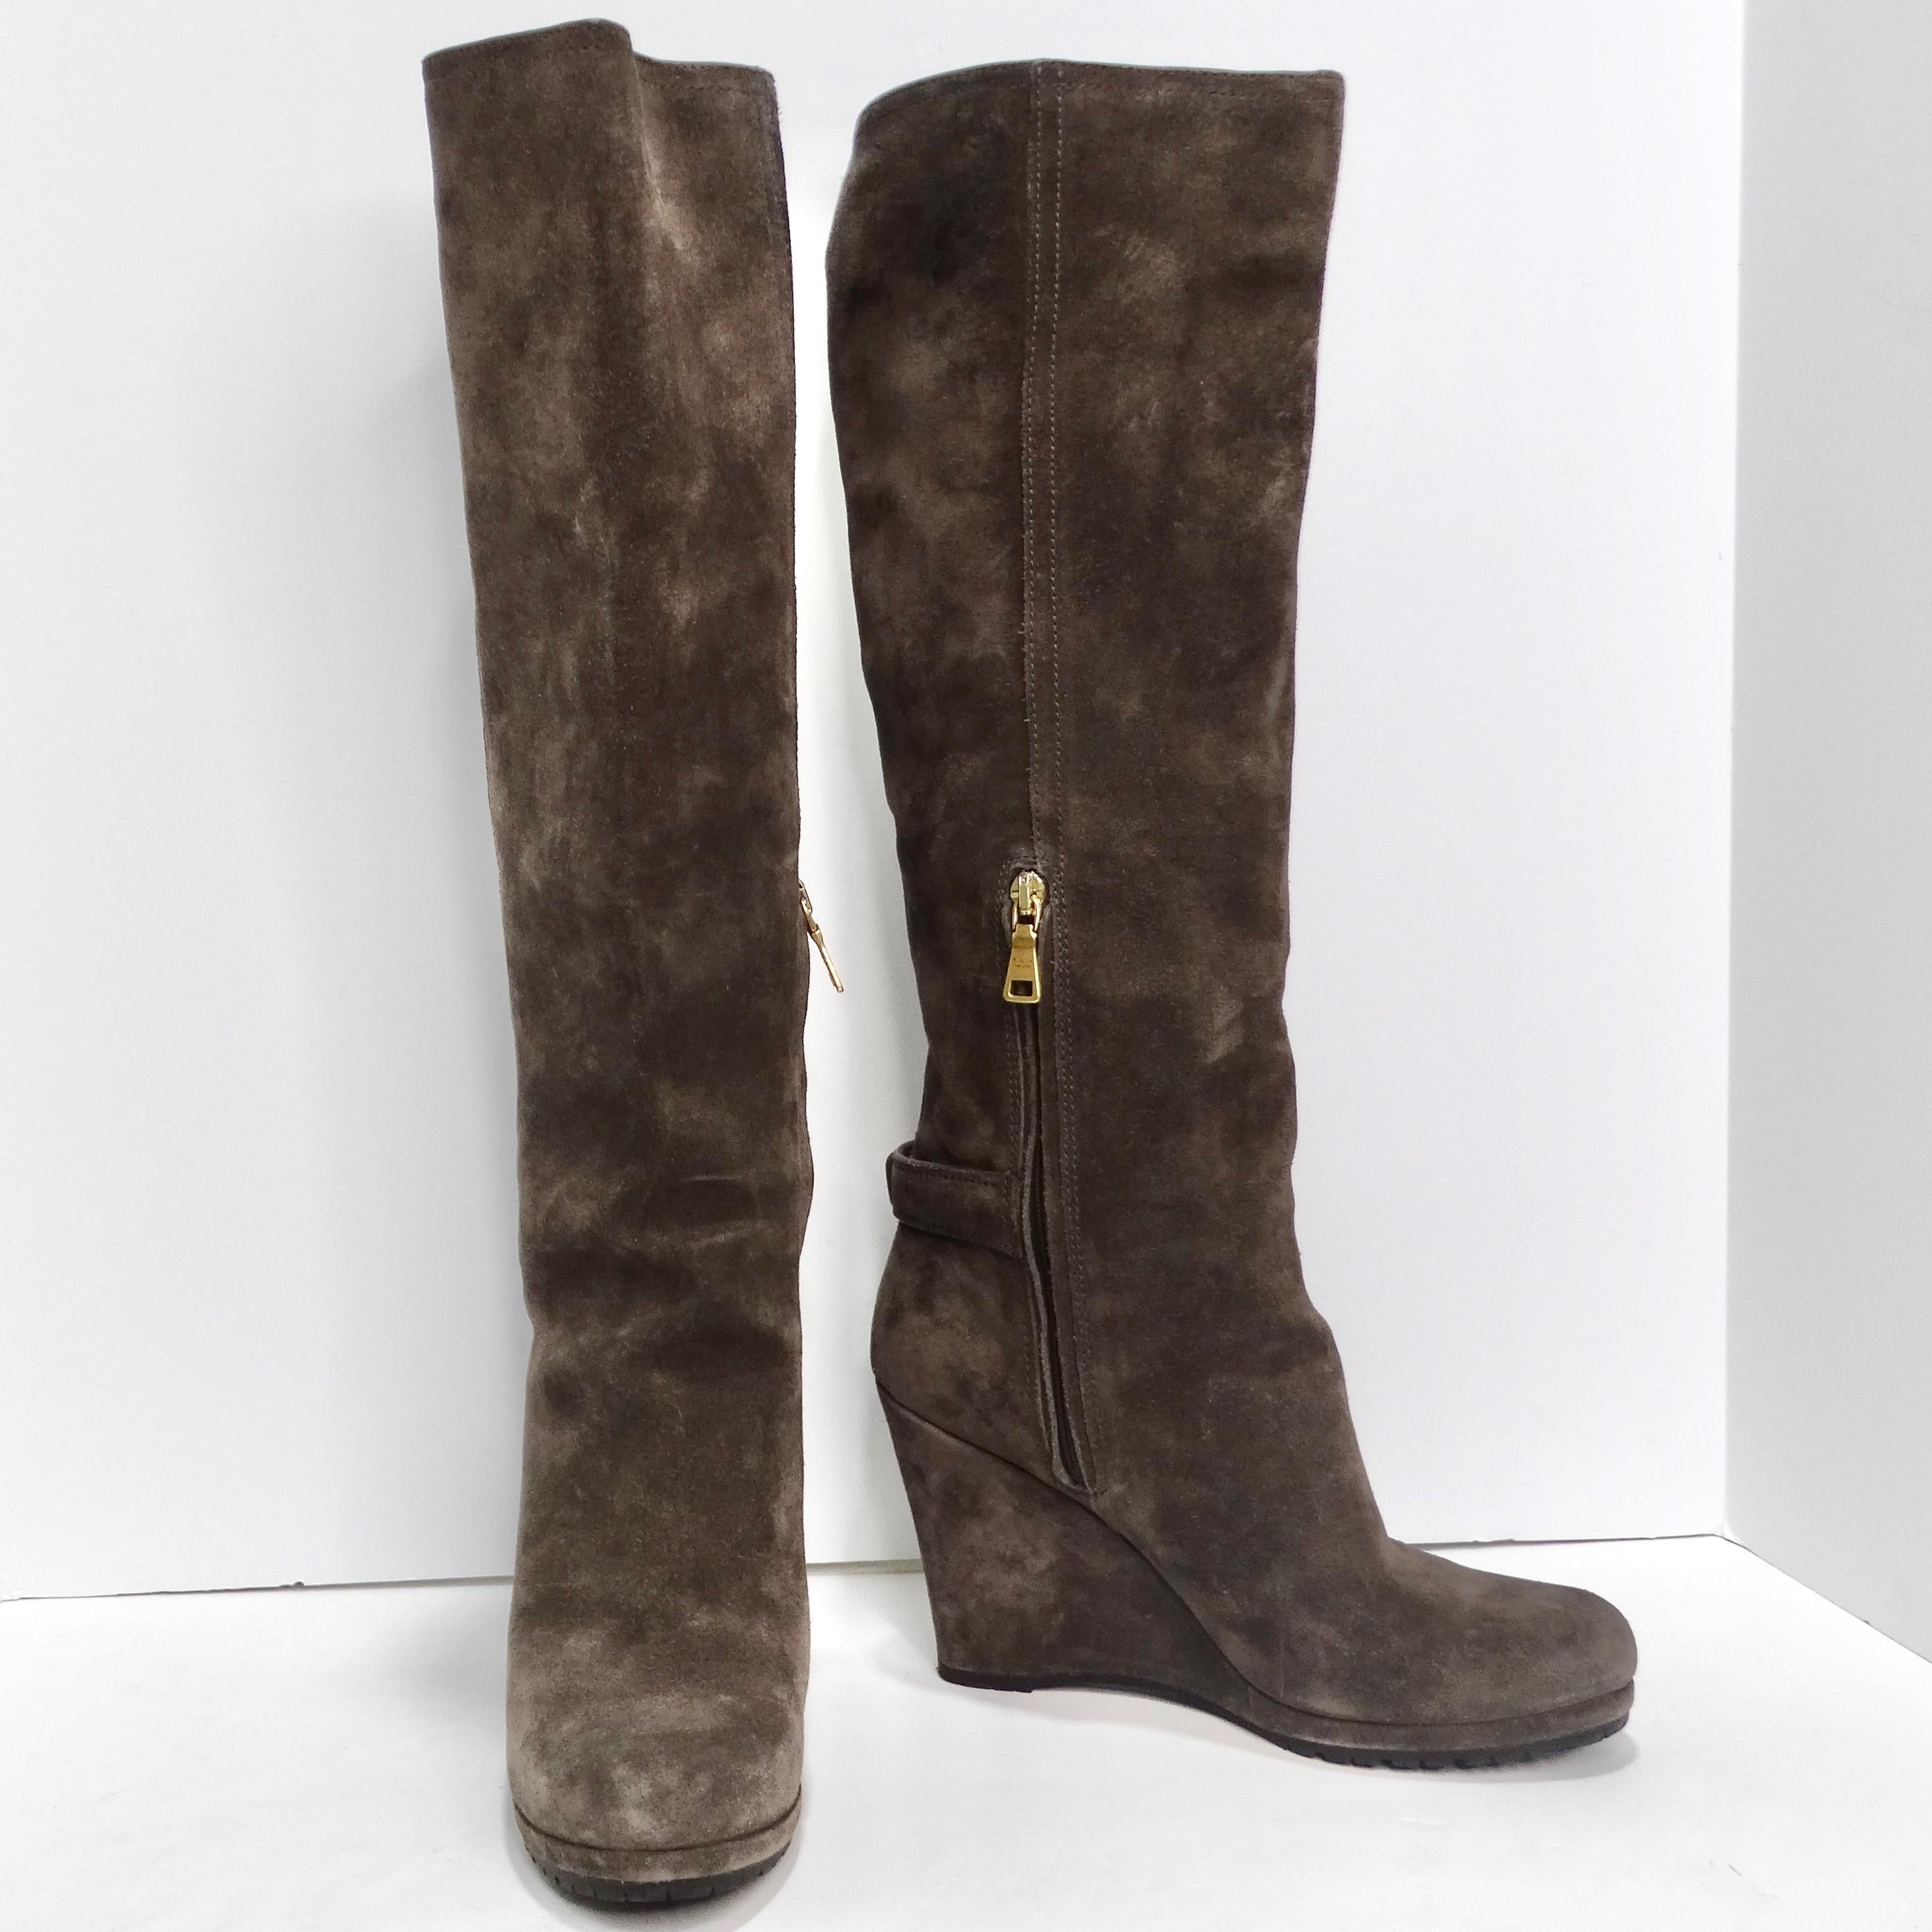 Prada Suede Wedge Boots In Excellent Condition For Sale In Scottsdale, AZ